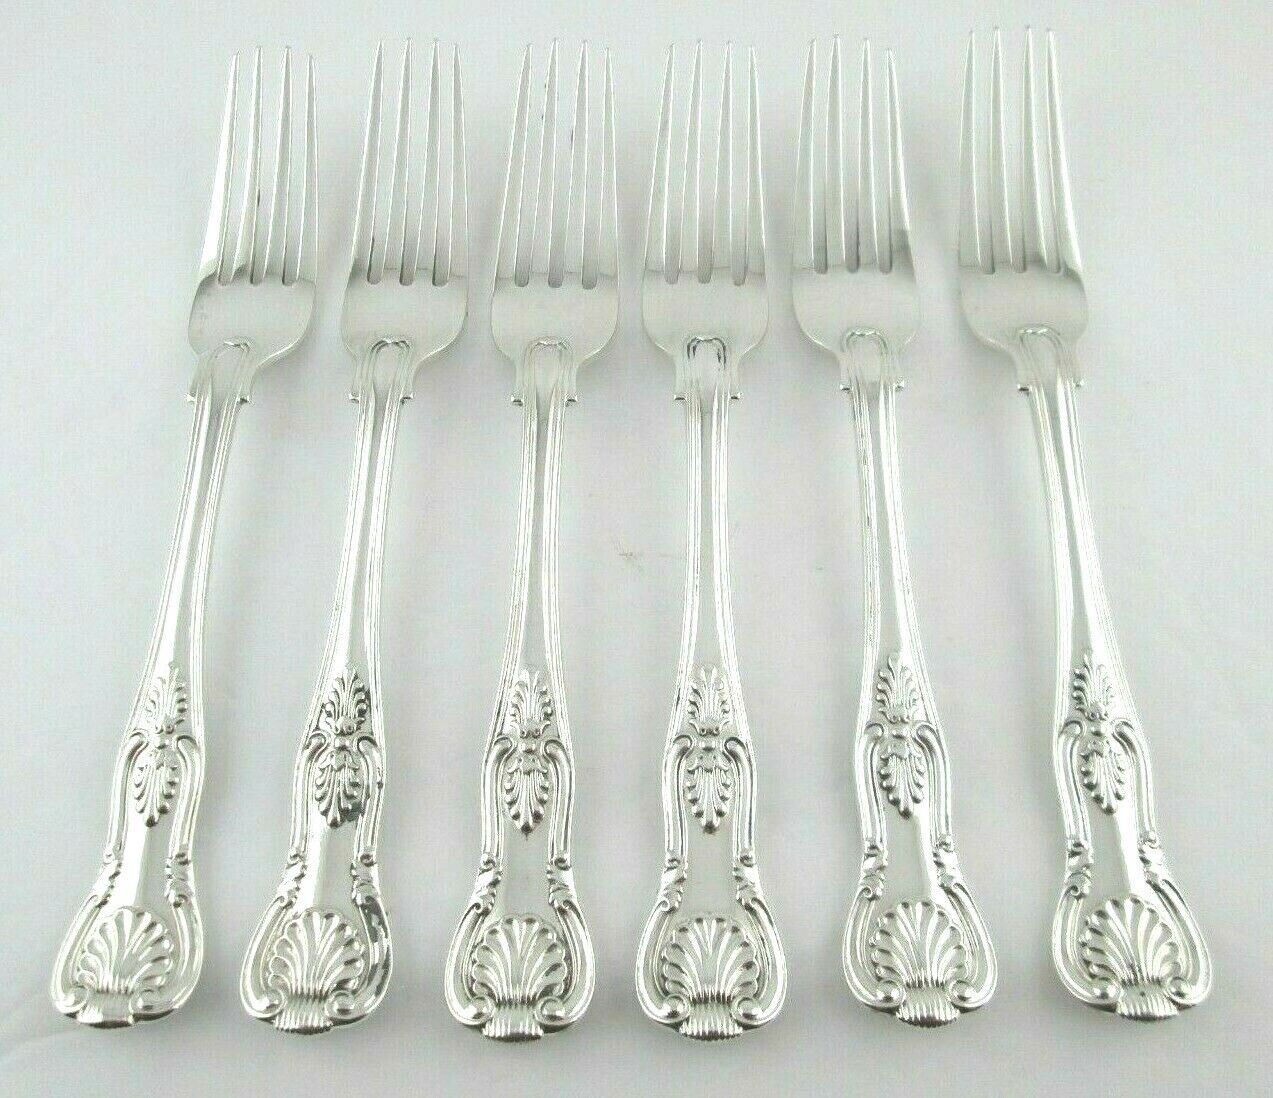 Antique English KINGS Sterling Silver Forks 7 1/8" 6 Pcs. George W. Adams